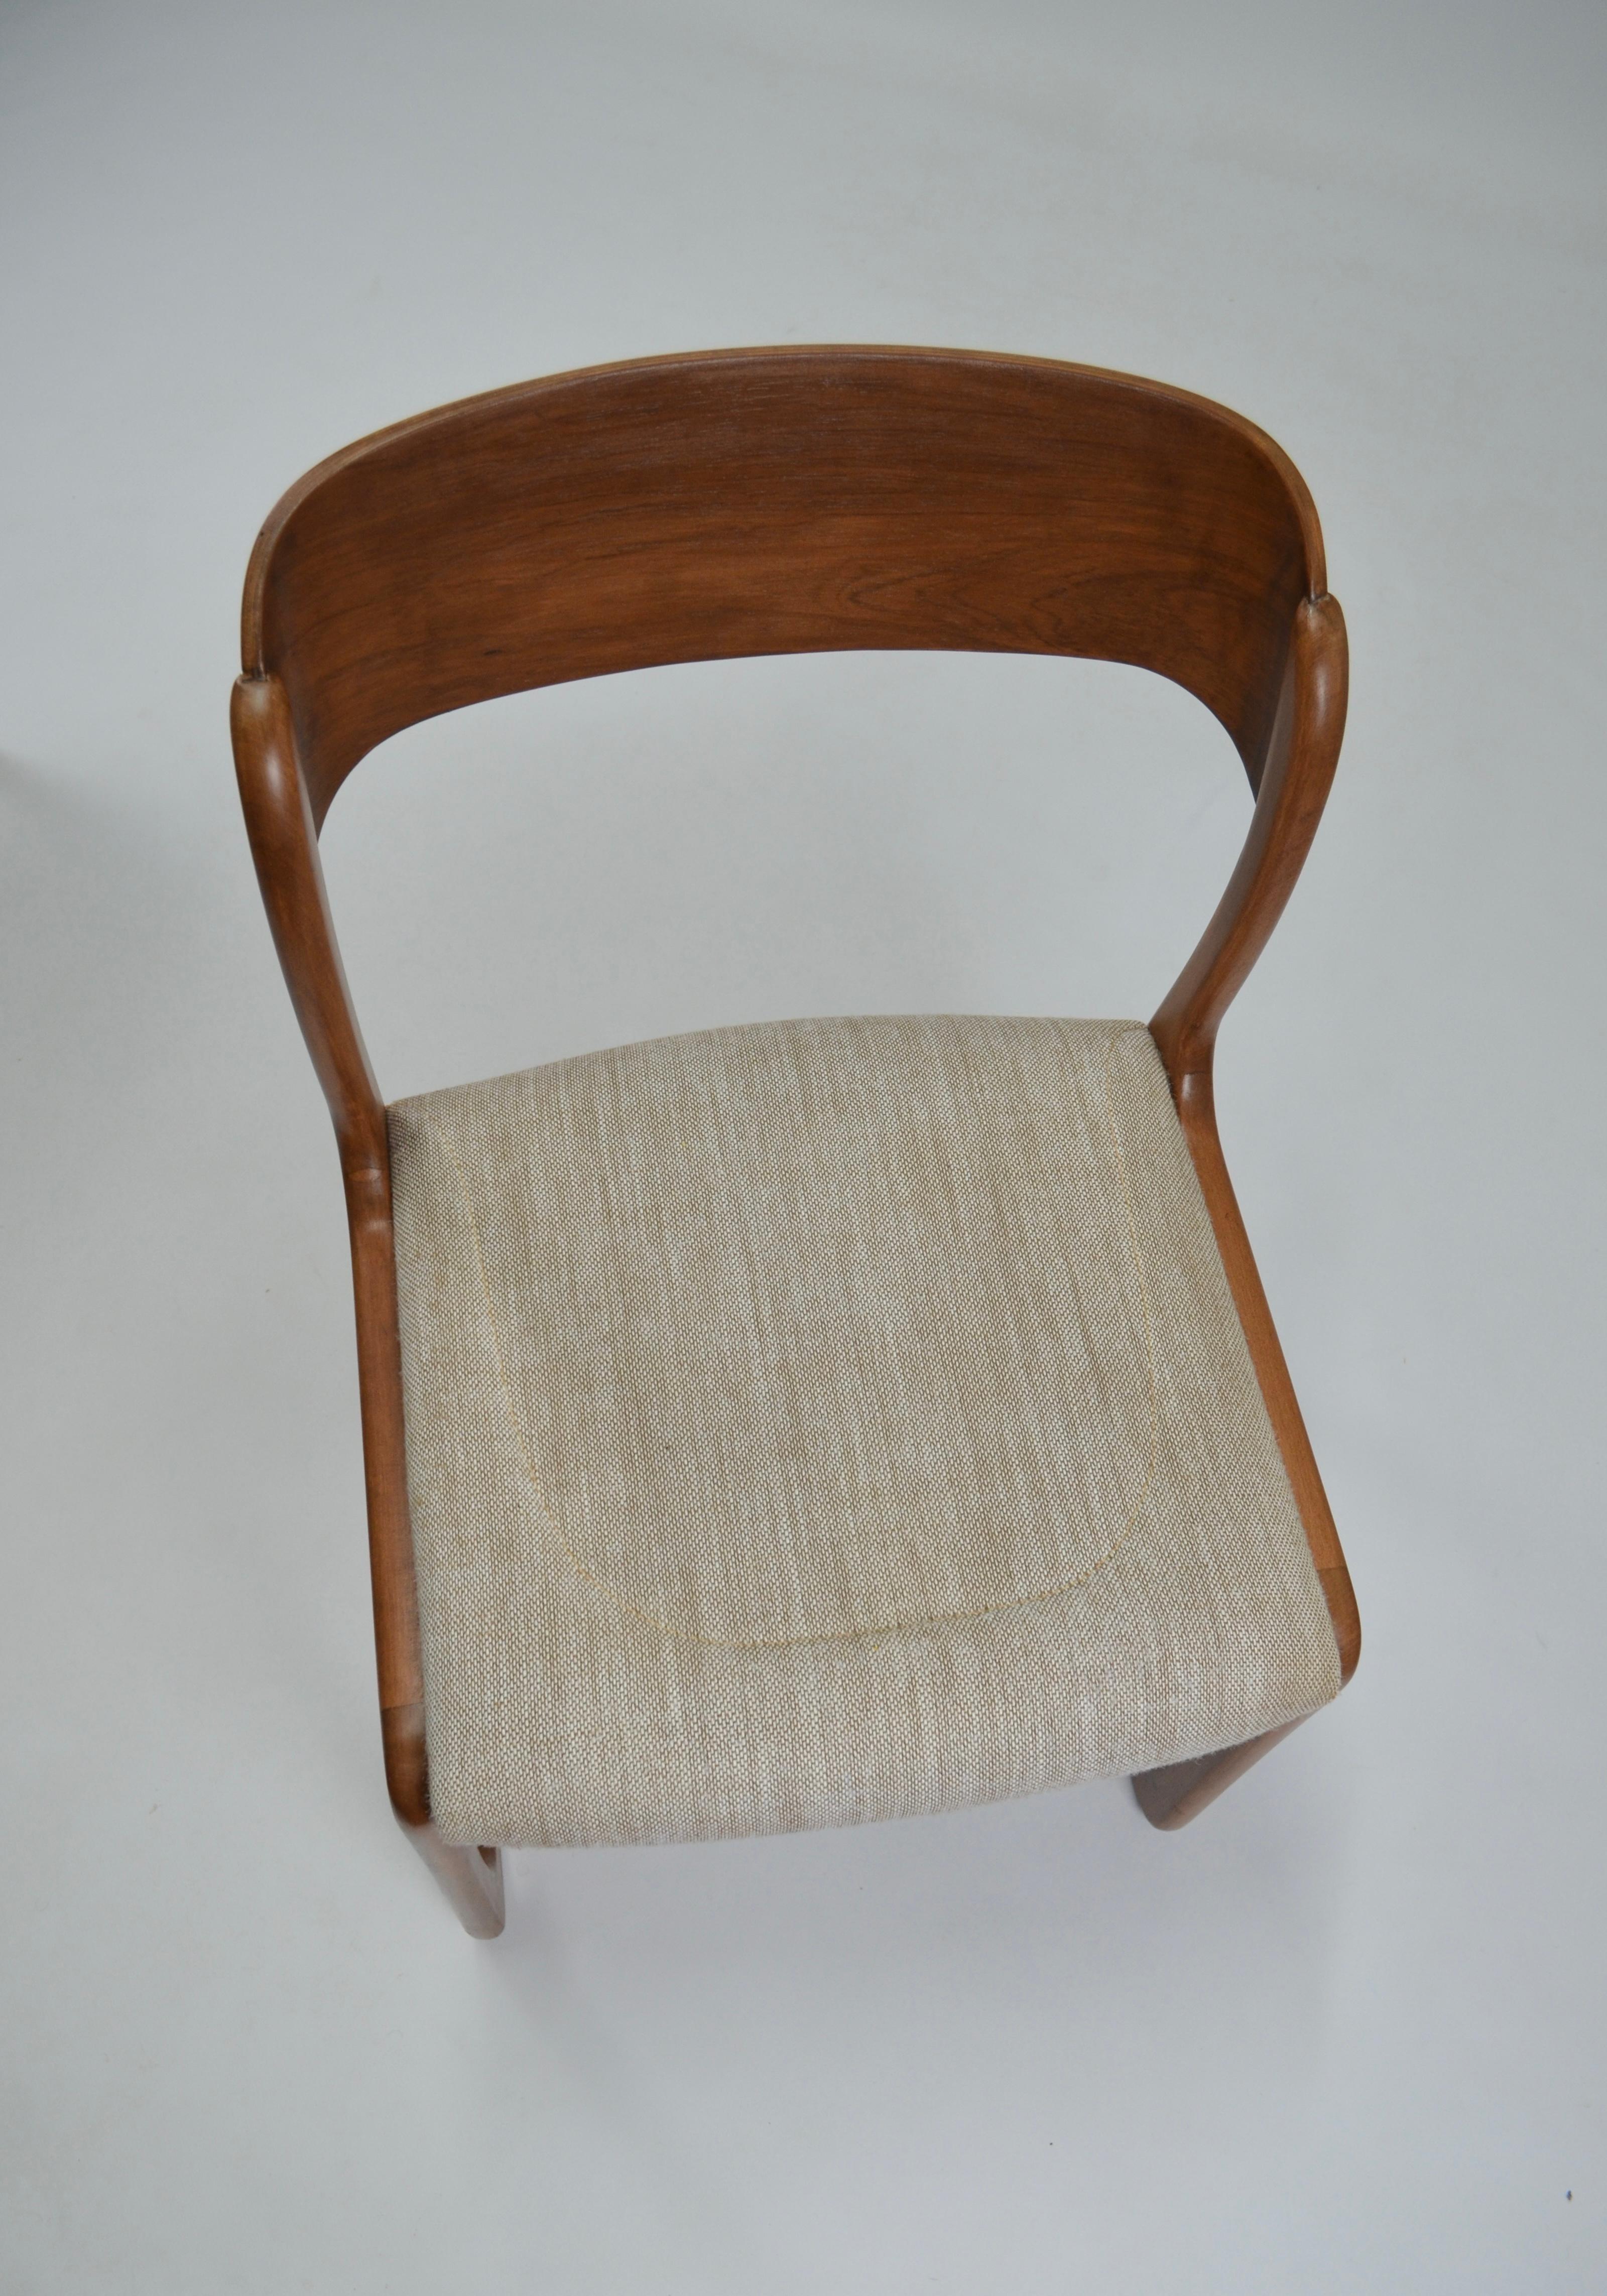 Vintage French Traineau or Sleigh Dining Chairs, Baumann, France, 60s For Sale 4